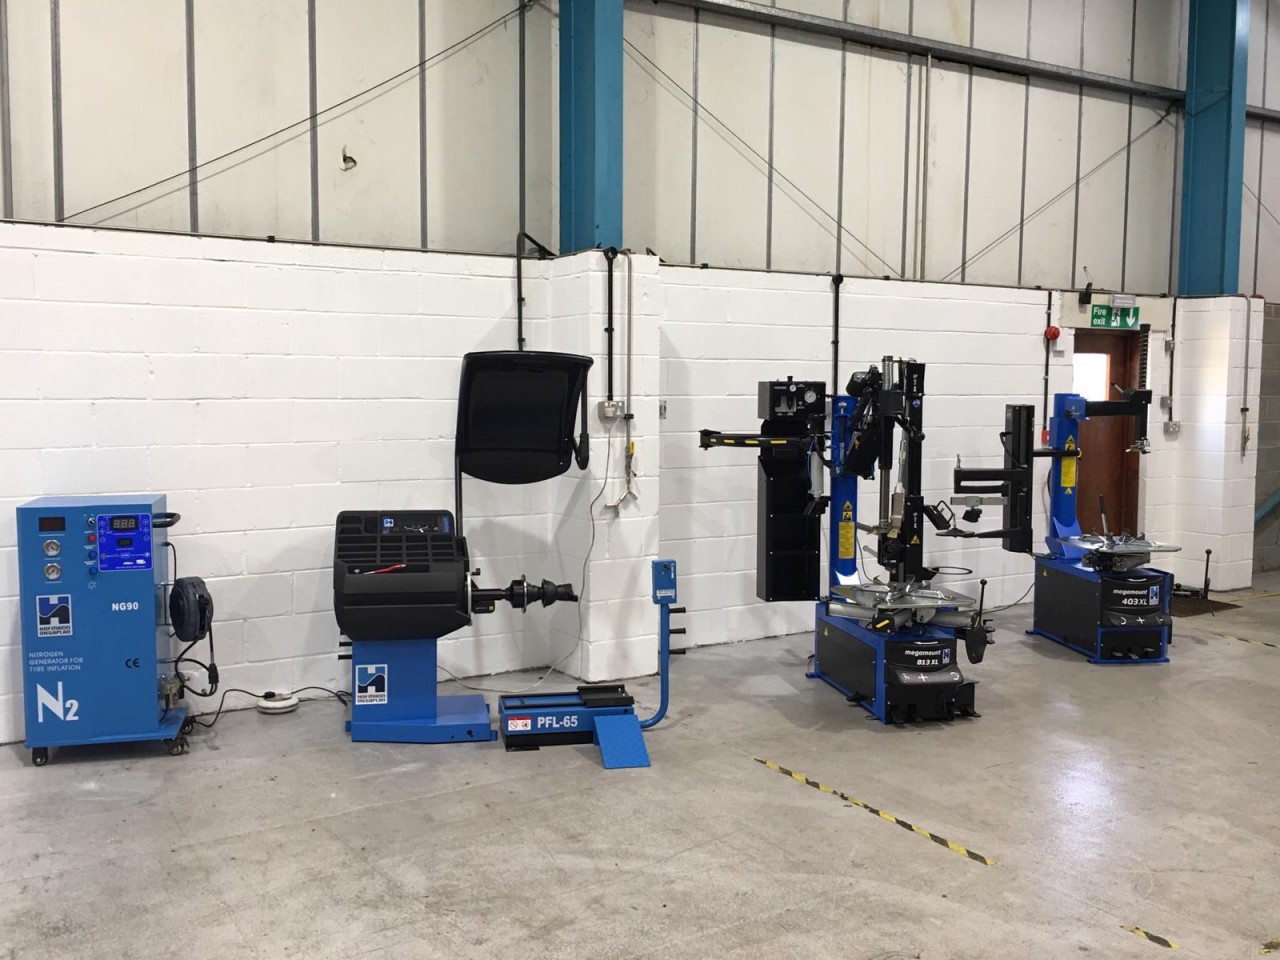 Full garage equipment installation including tyre changers and wheel balancer with One Weight Balance from Hofmann Megaplan.